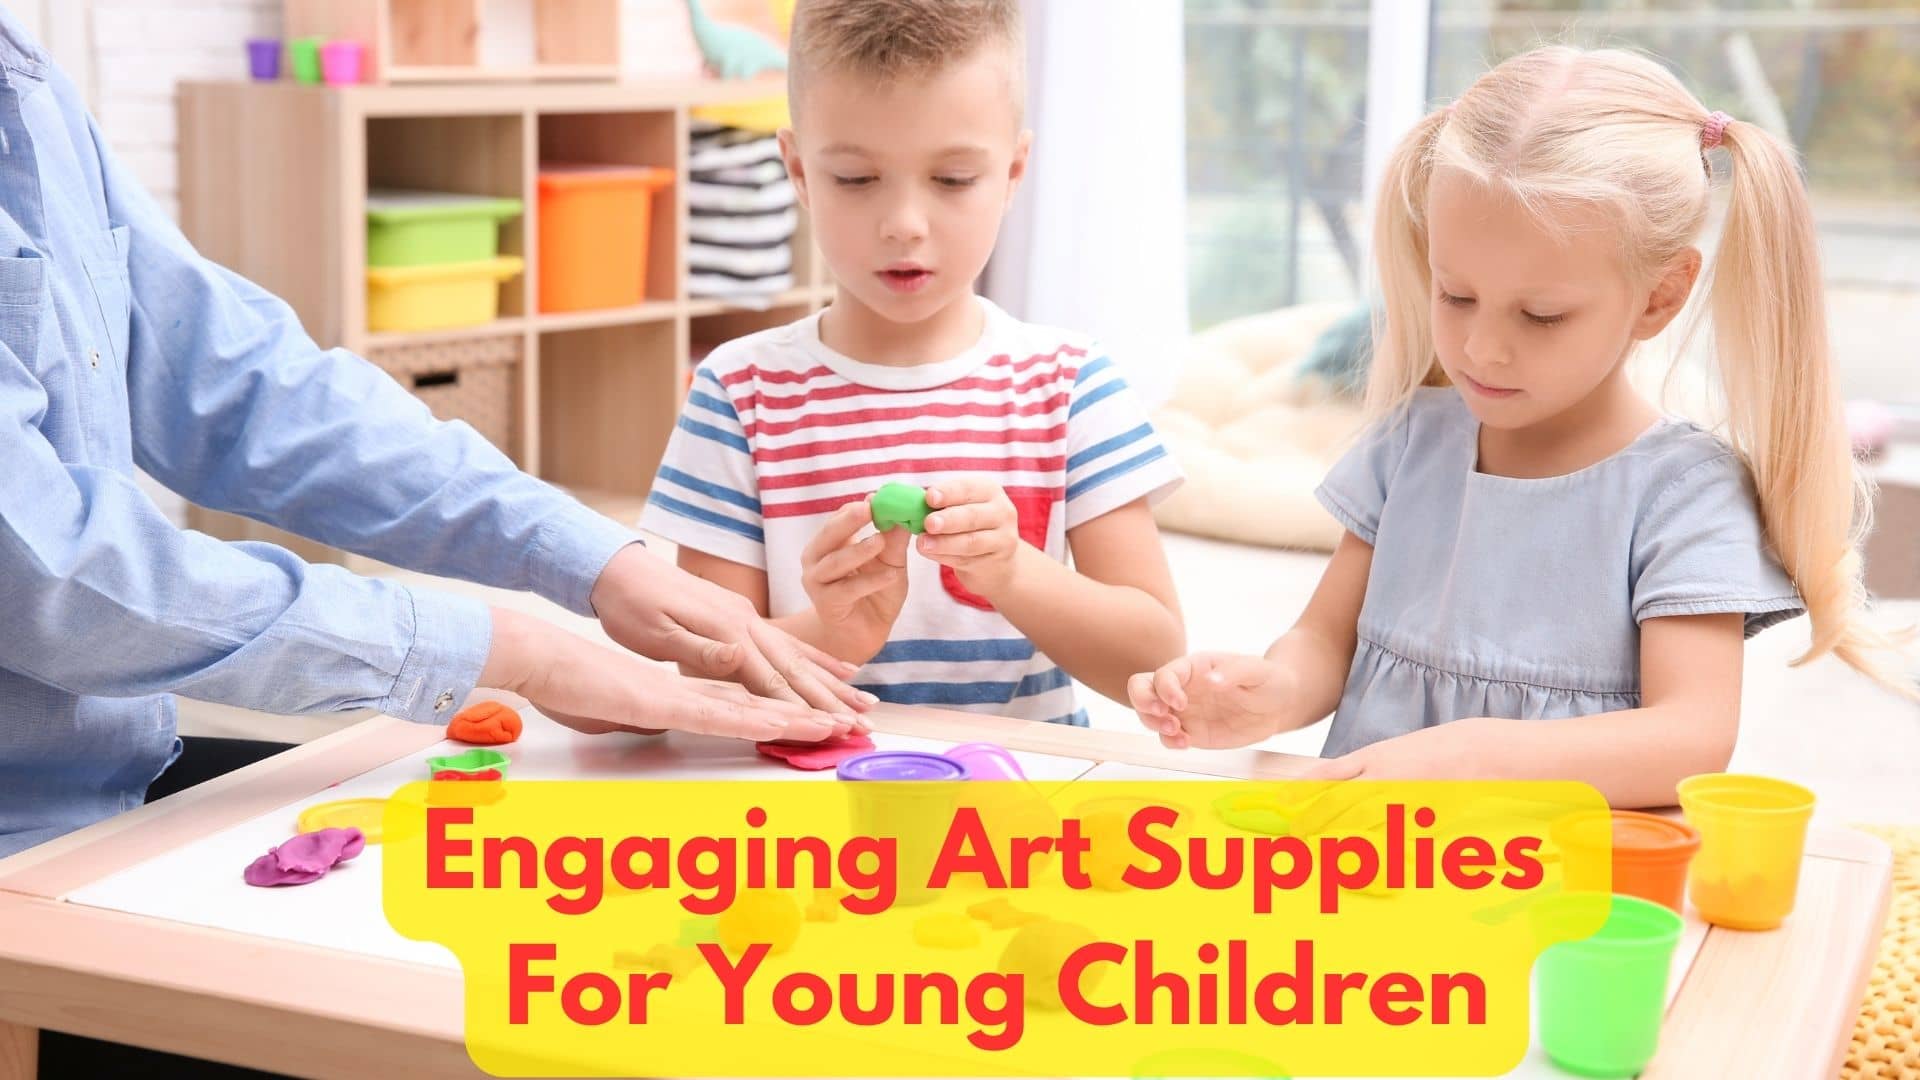 What Are Some Best Art Supplies For Kids?